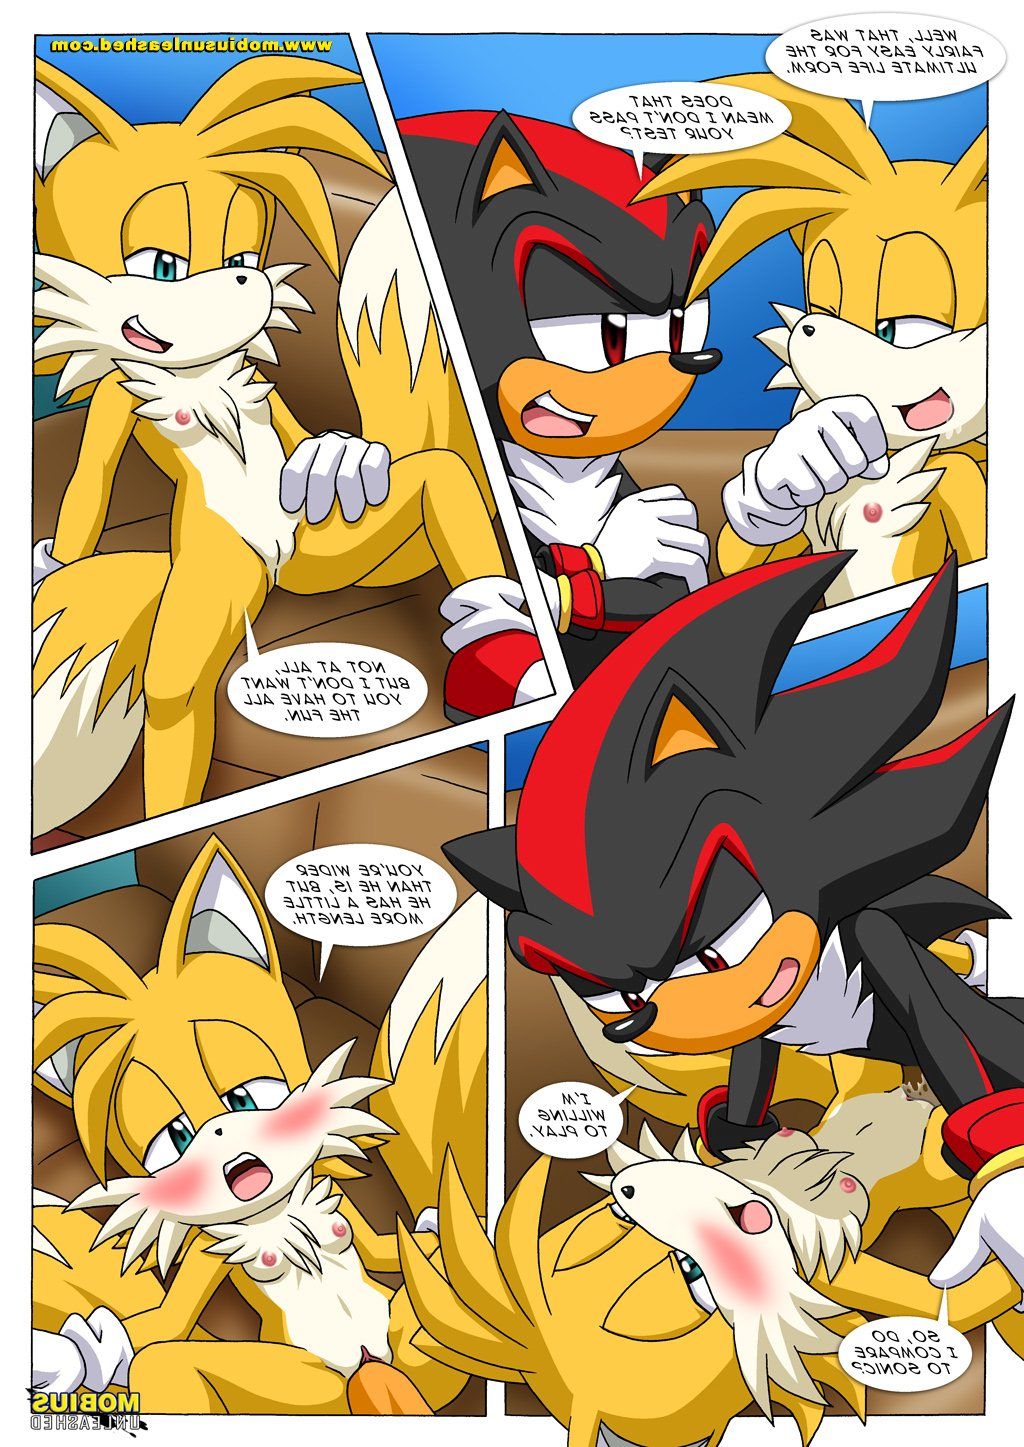 tails-tales-2 image_13444.jpg